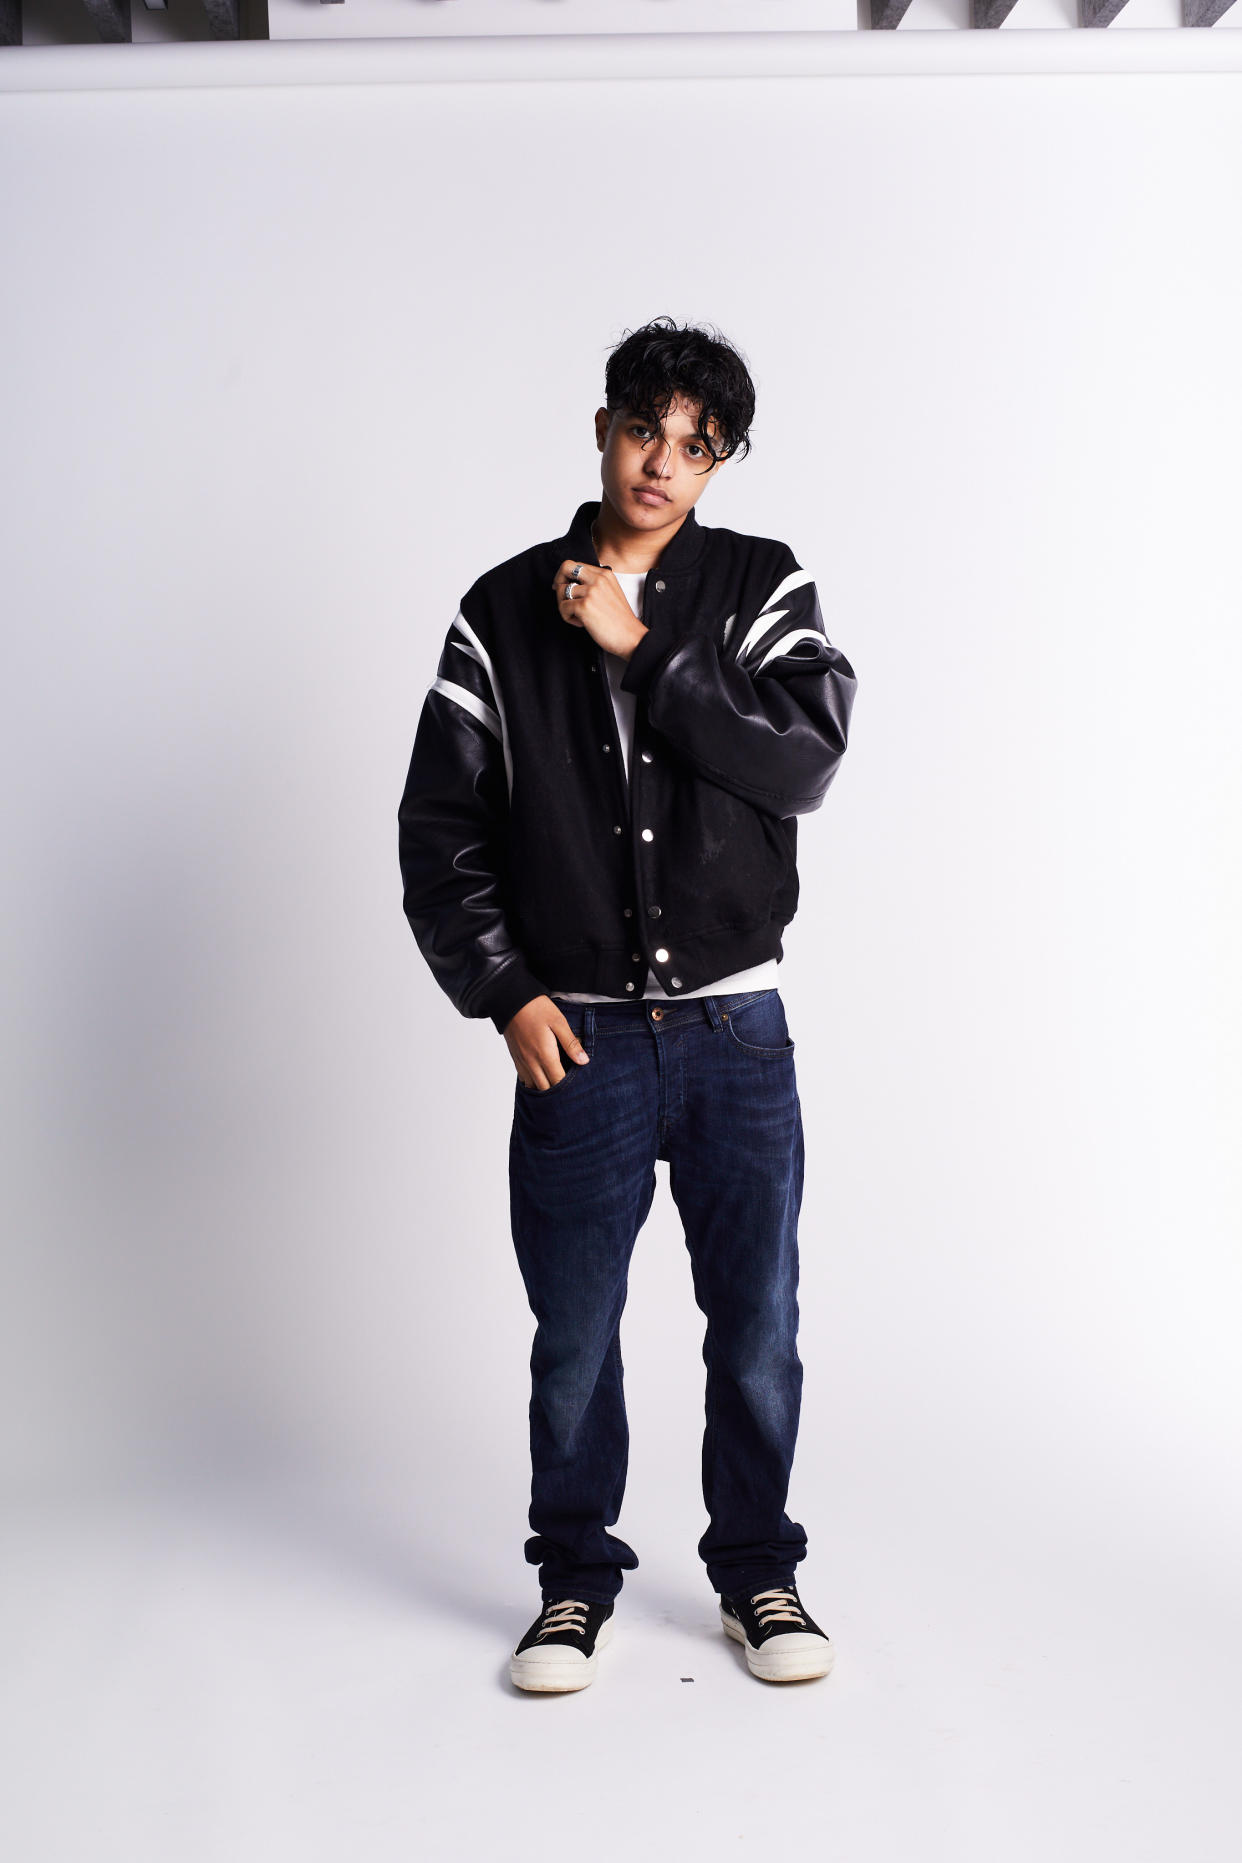 Kamal. has previously featured on the multi-award winning rapper Dave’s track Mercury (The Ivor Academy)